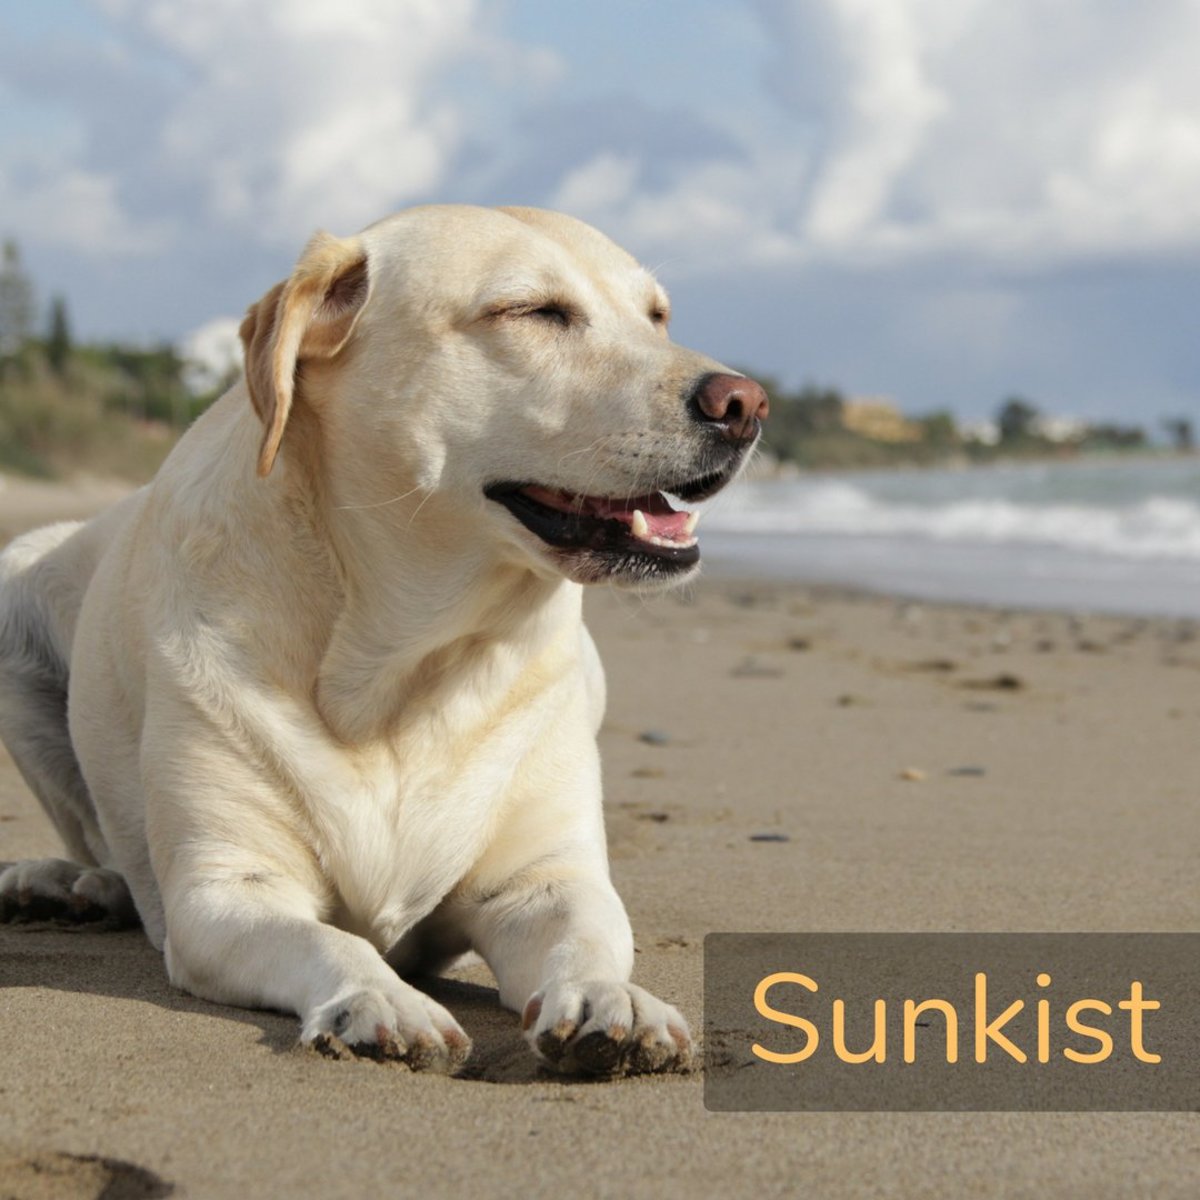 Is your new dog full of life? Sunkist might just be the perfect name. 